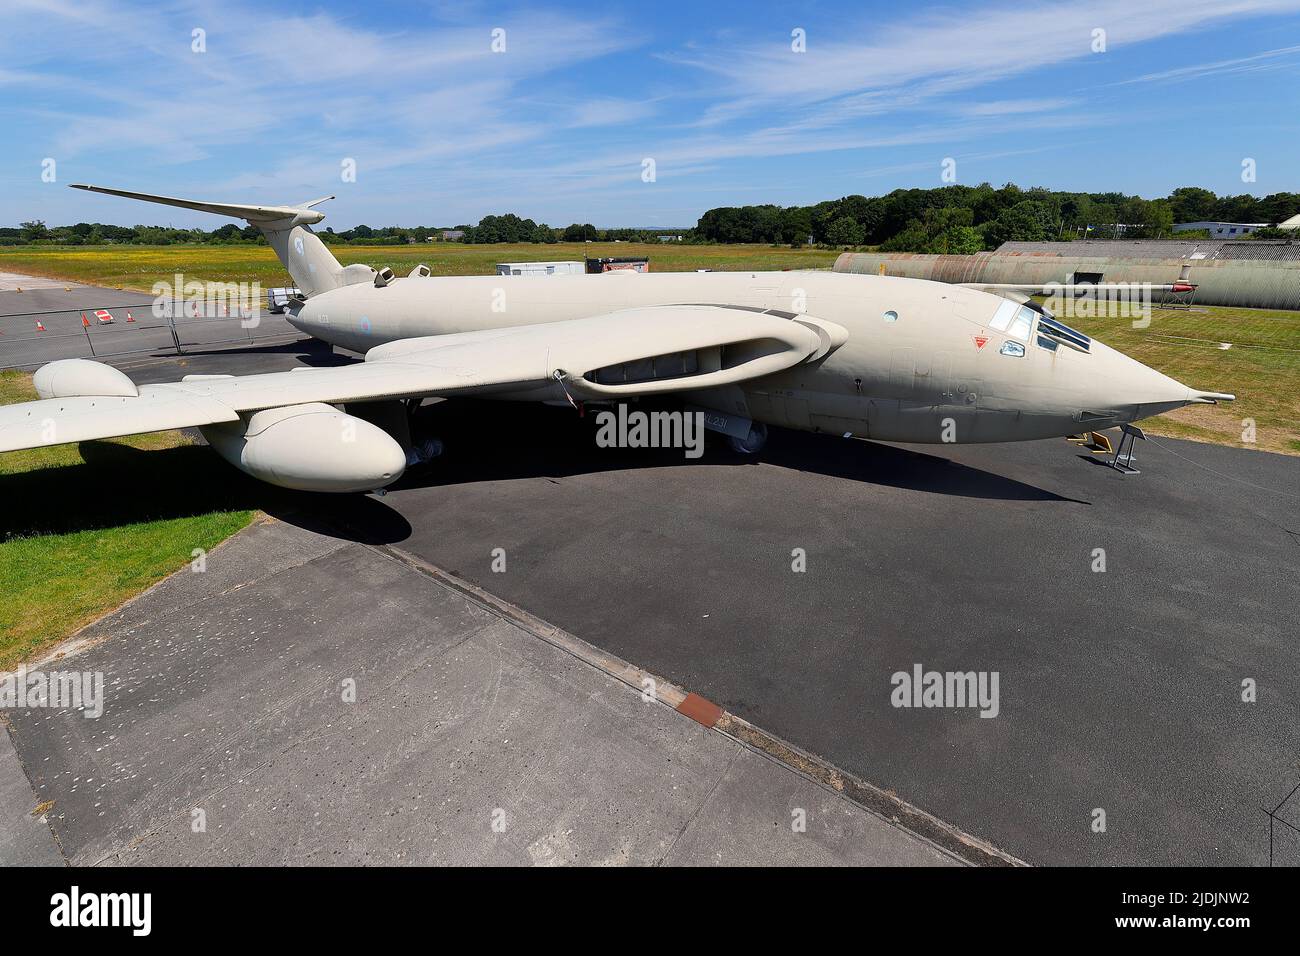 A preserved Handley Page Victor K.2 Tanker exhibit at The Yorkshire Air Museum in Elvington,North Yorkshire,UK Stock Photo